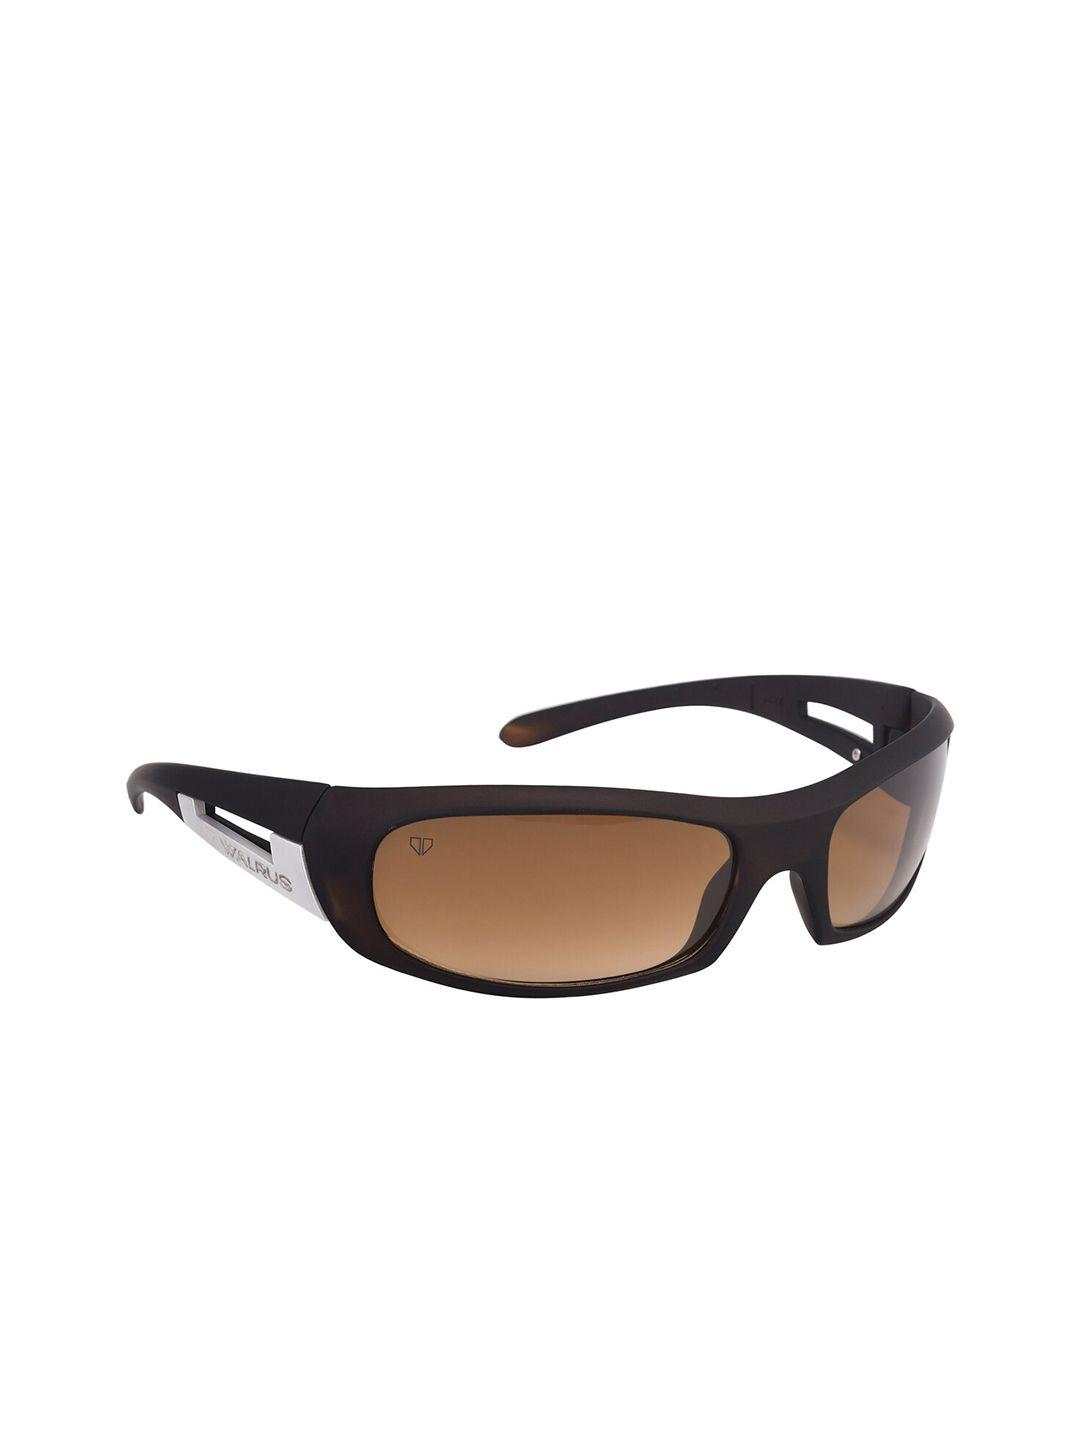 walrus men brown lens & brown sports sunglasses with uv protected lens wsgm-bdn-090909